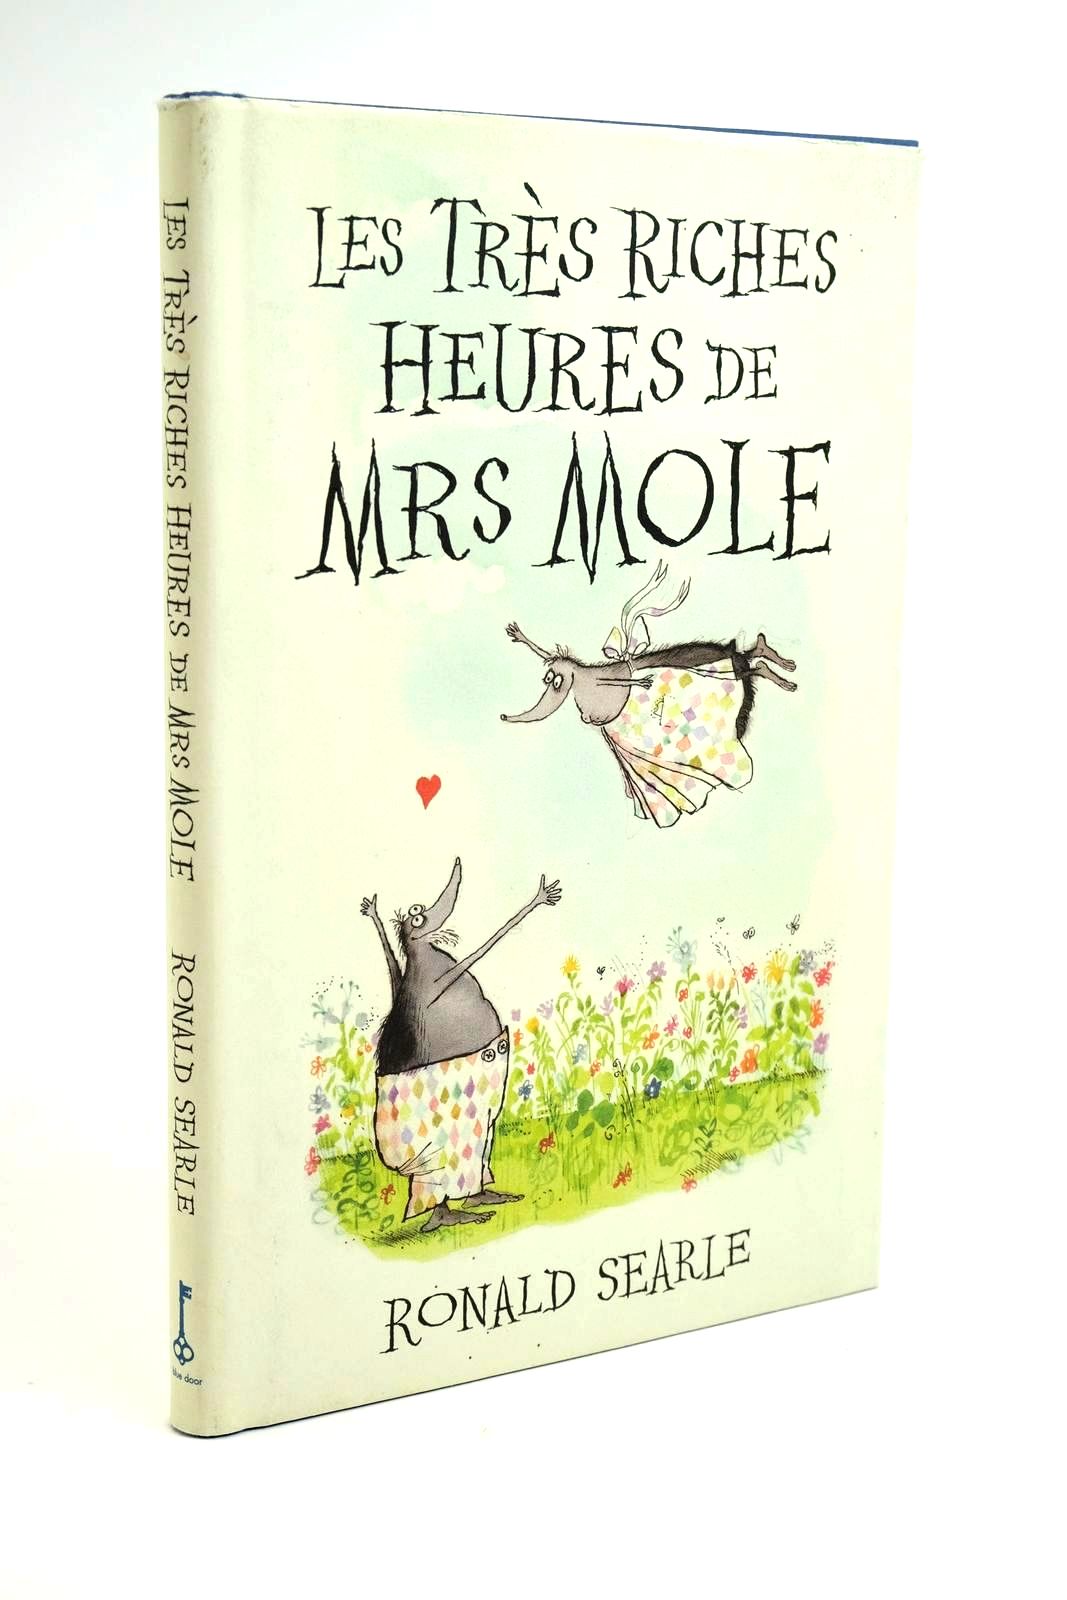 Photo of LES TRES RICHES HEURES DE MRS MOLE written by Searle, Ronald illustrated by Searle, Ronald published by Blue Door, Harper Collins Publishers Ltd (STOCK CODE: 1321671)  for sale by Stella & Rose's Books